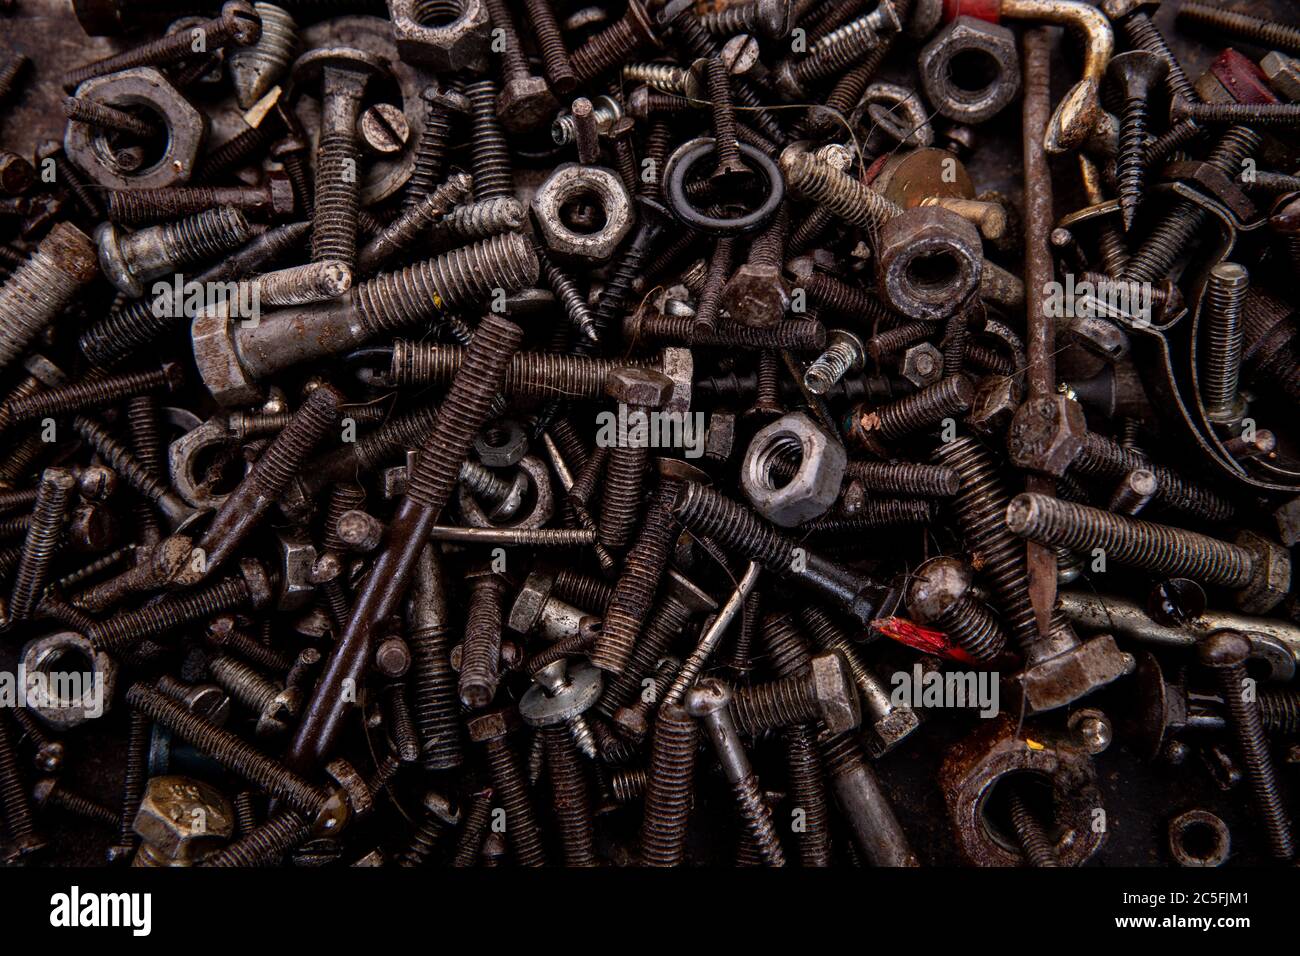 old nuts screws and nails greasy and dirty heavily rusted lie on a metal dark background 2C5FJM1